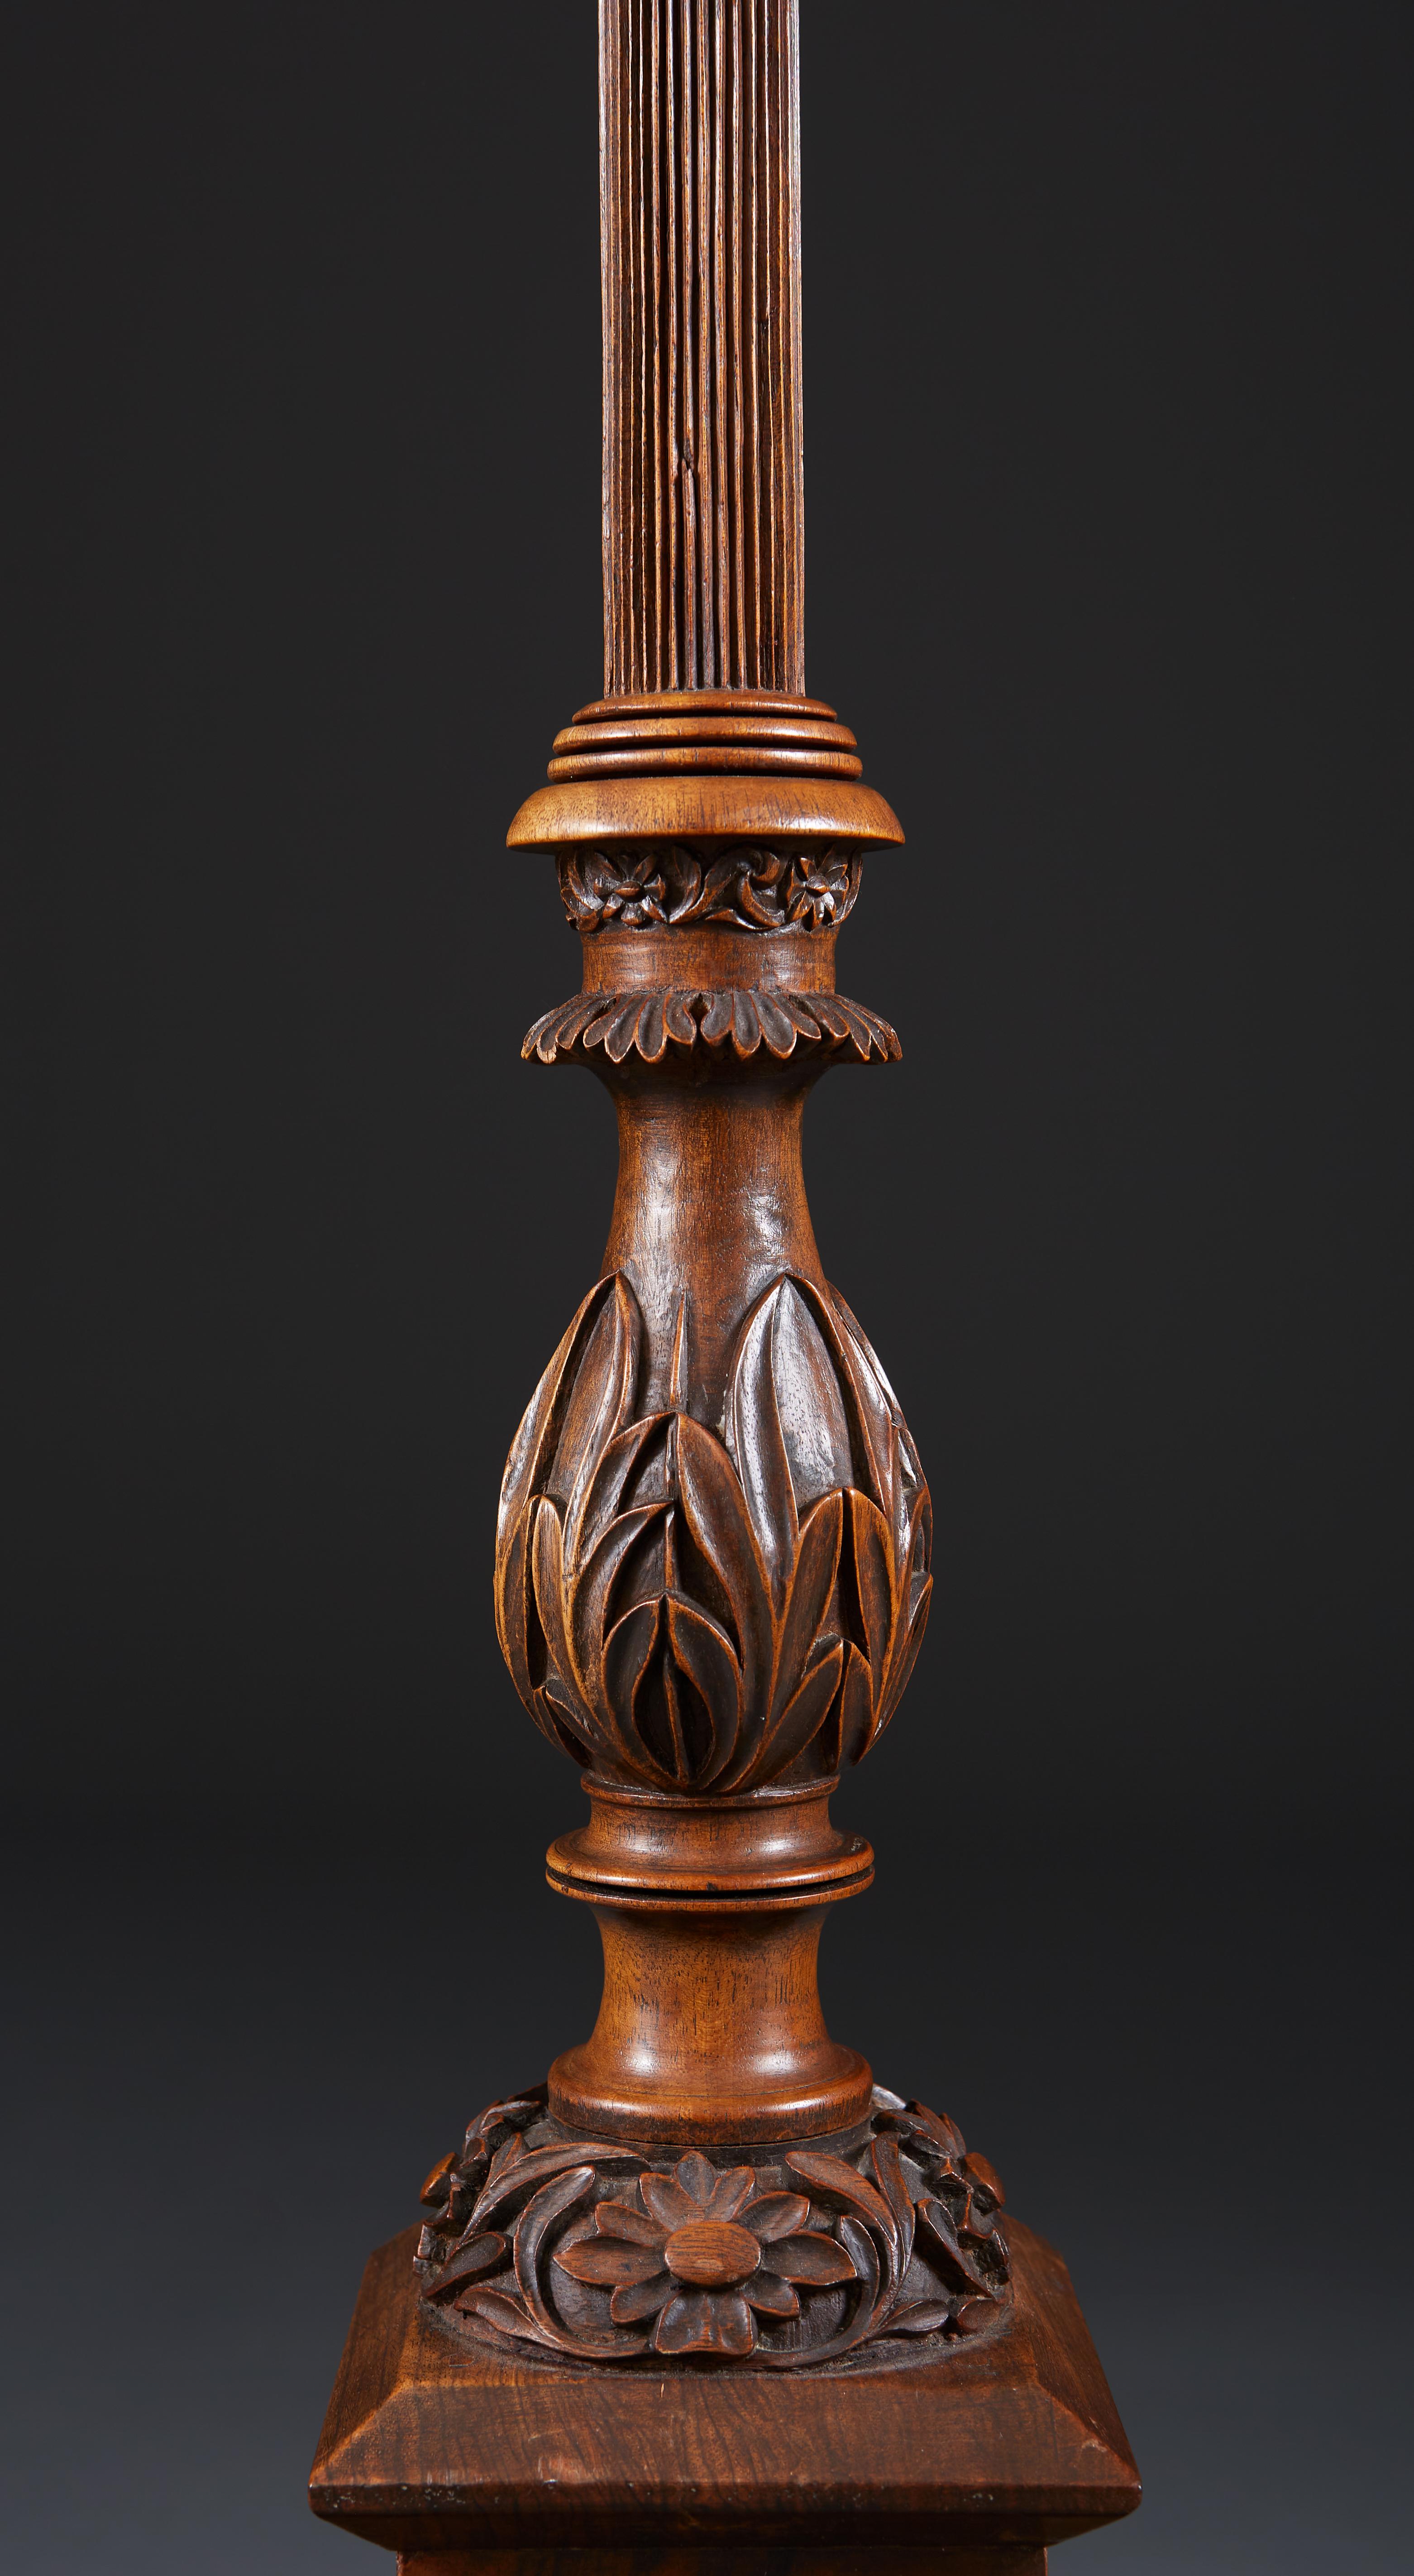 An Anglo-Indian carved stained hardwood table lamp, the reeded stem above a foliate baluster descending to a stepped square base, carved with foliage and outscrolled corners.

Please note: lampshade not included.

Currently wired for the UK.